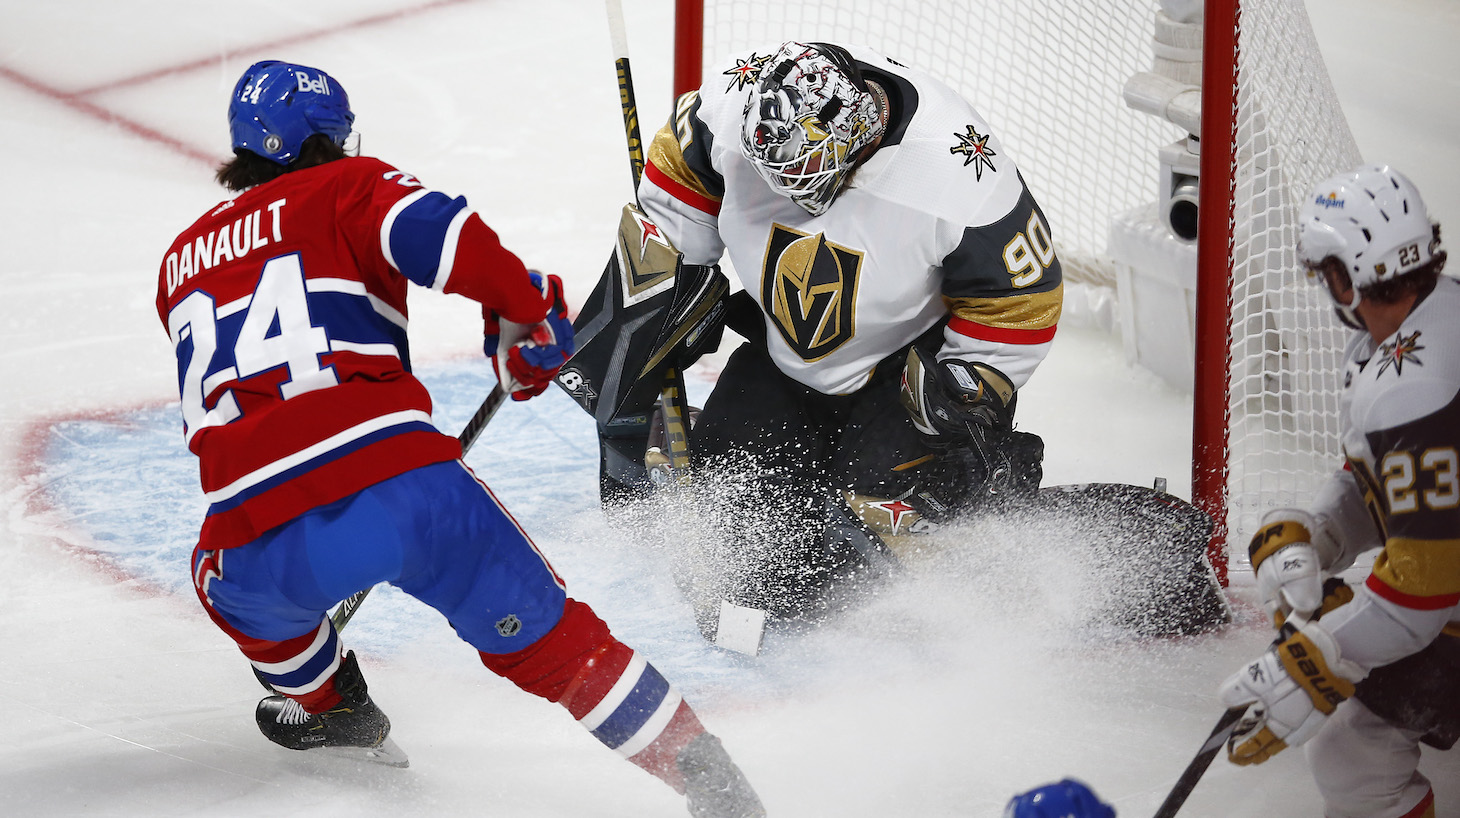 MONTREAL, QUEBEC - JUNE 20: Robin Lehner #90 of the Vegas Golden Knights makes the save against Phillip Danault #24 of the Montreal Canadiens during the second period in Game Four of the Stanley Cup Semifinals of the 2021 Stanley Cup Playoffs at Bell Centre on June 20, 2021 in Montreal, Quebec. (Photo by Vaughn Ridley/Getty Images)